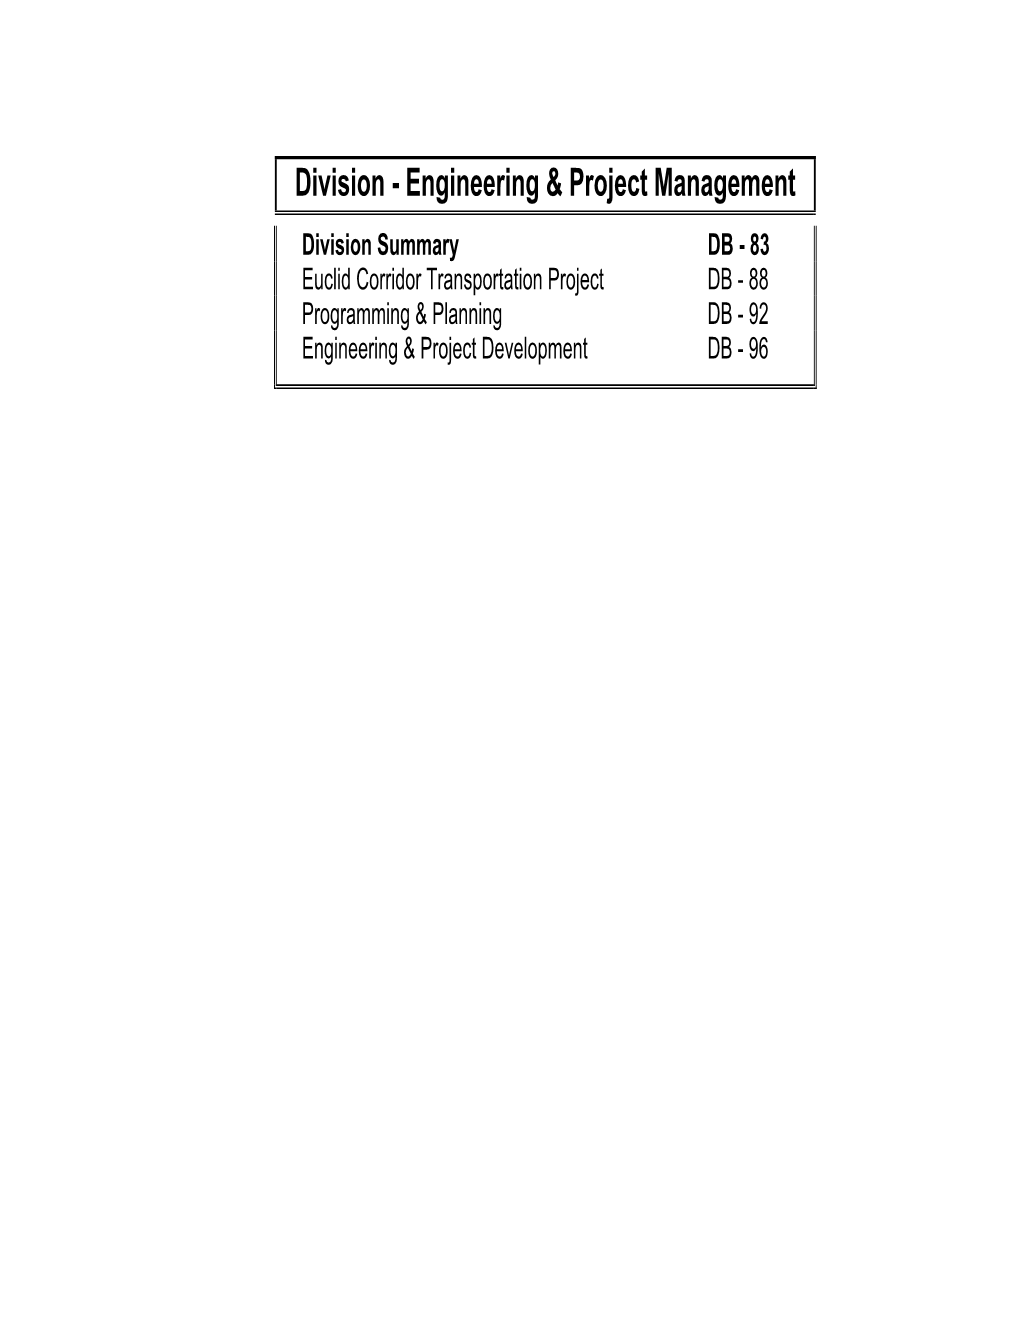 Engineering & Project Management Division